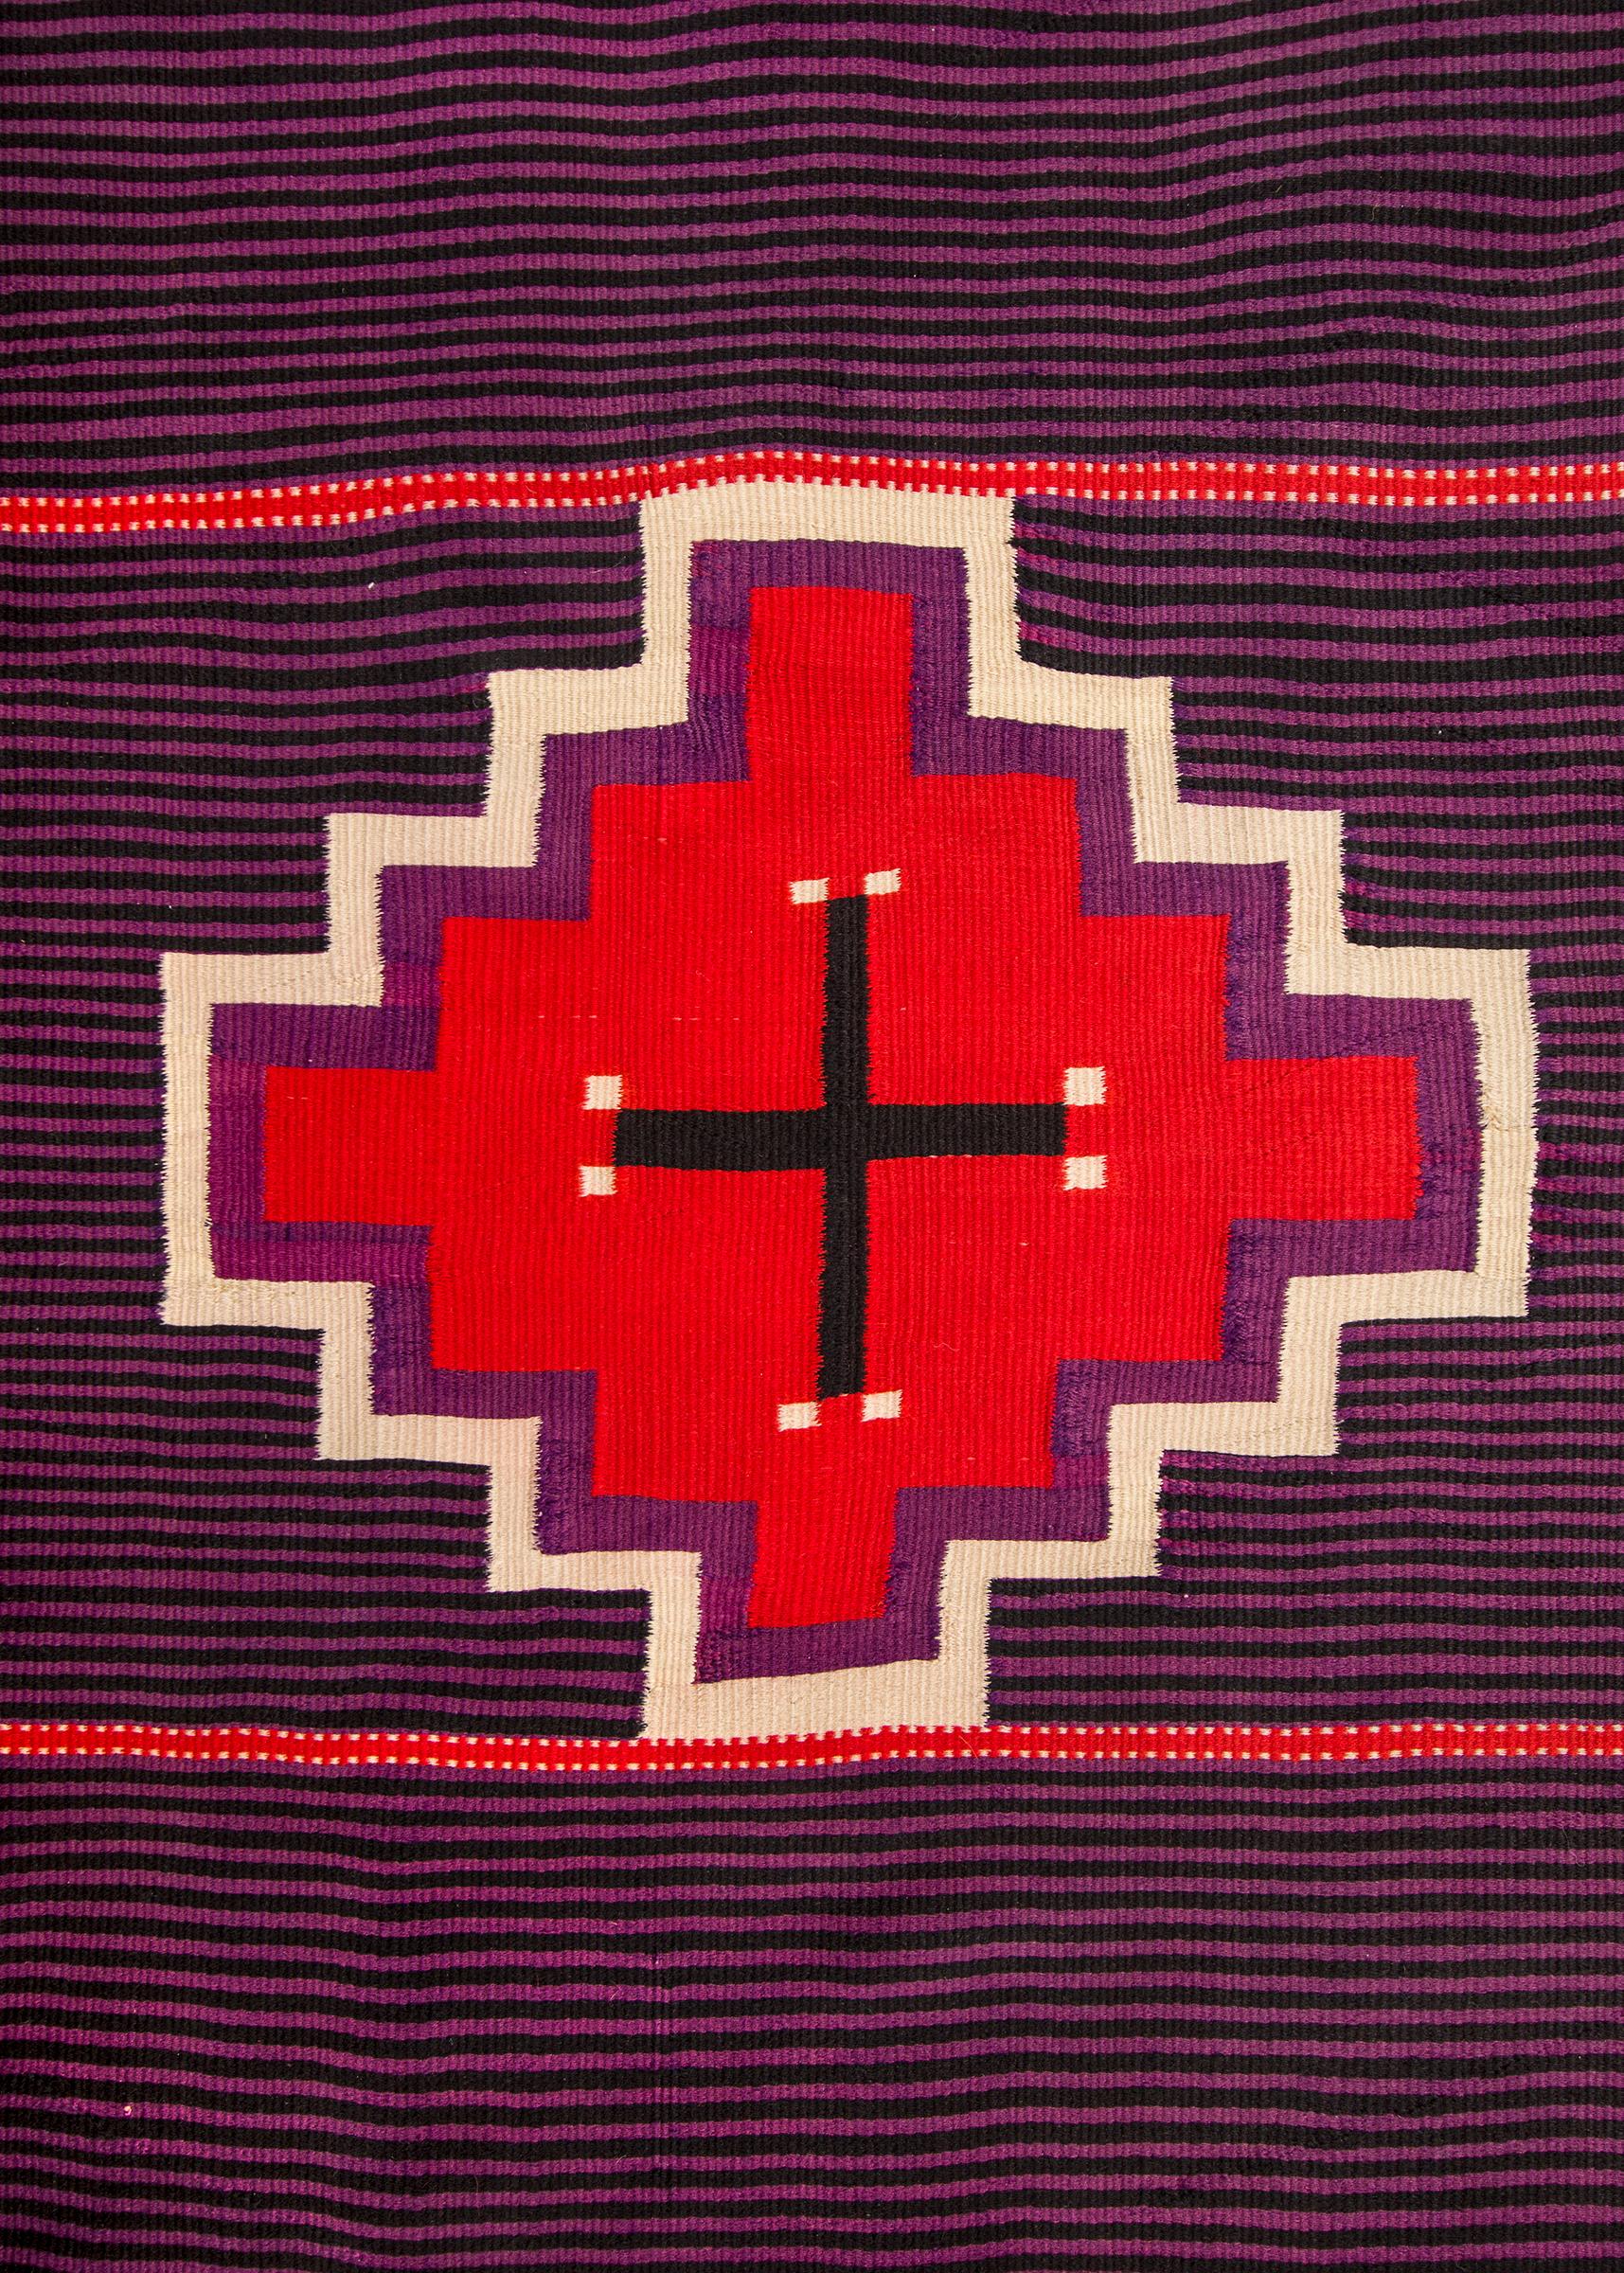 American 19th Century Navajo Blanket with a Nine Point Diamond and Cross with Red For Sale